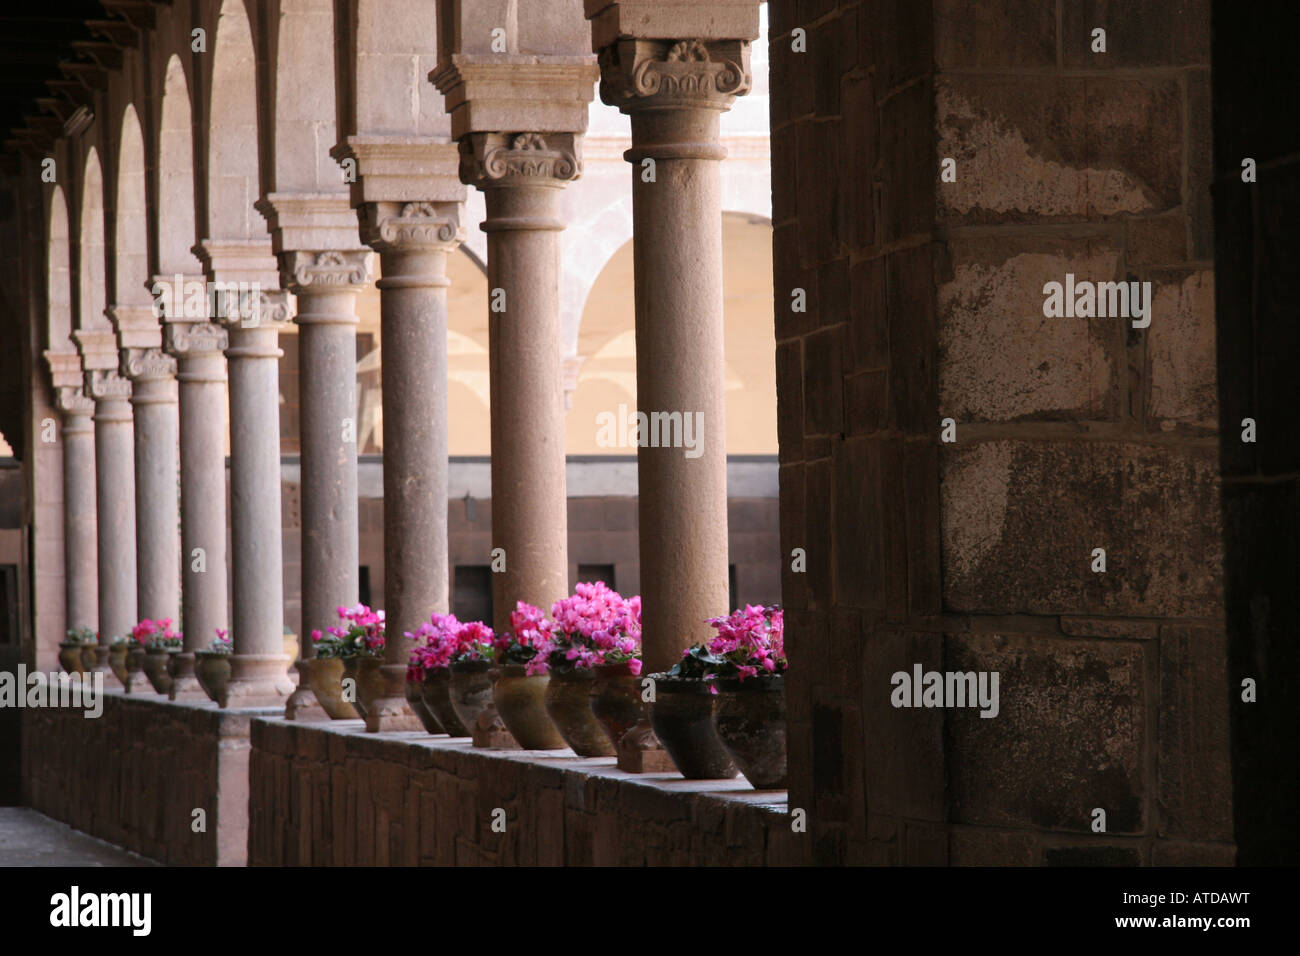 Arched columns and potted flowers line the courtyard of the Iglesia de Santo Domingo, Cusco Peru Stock Photo